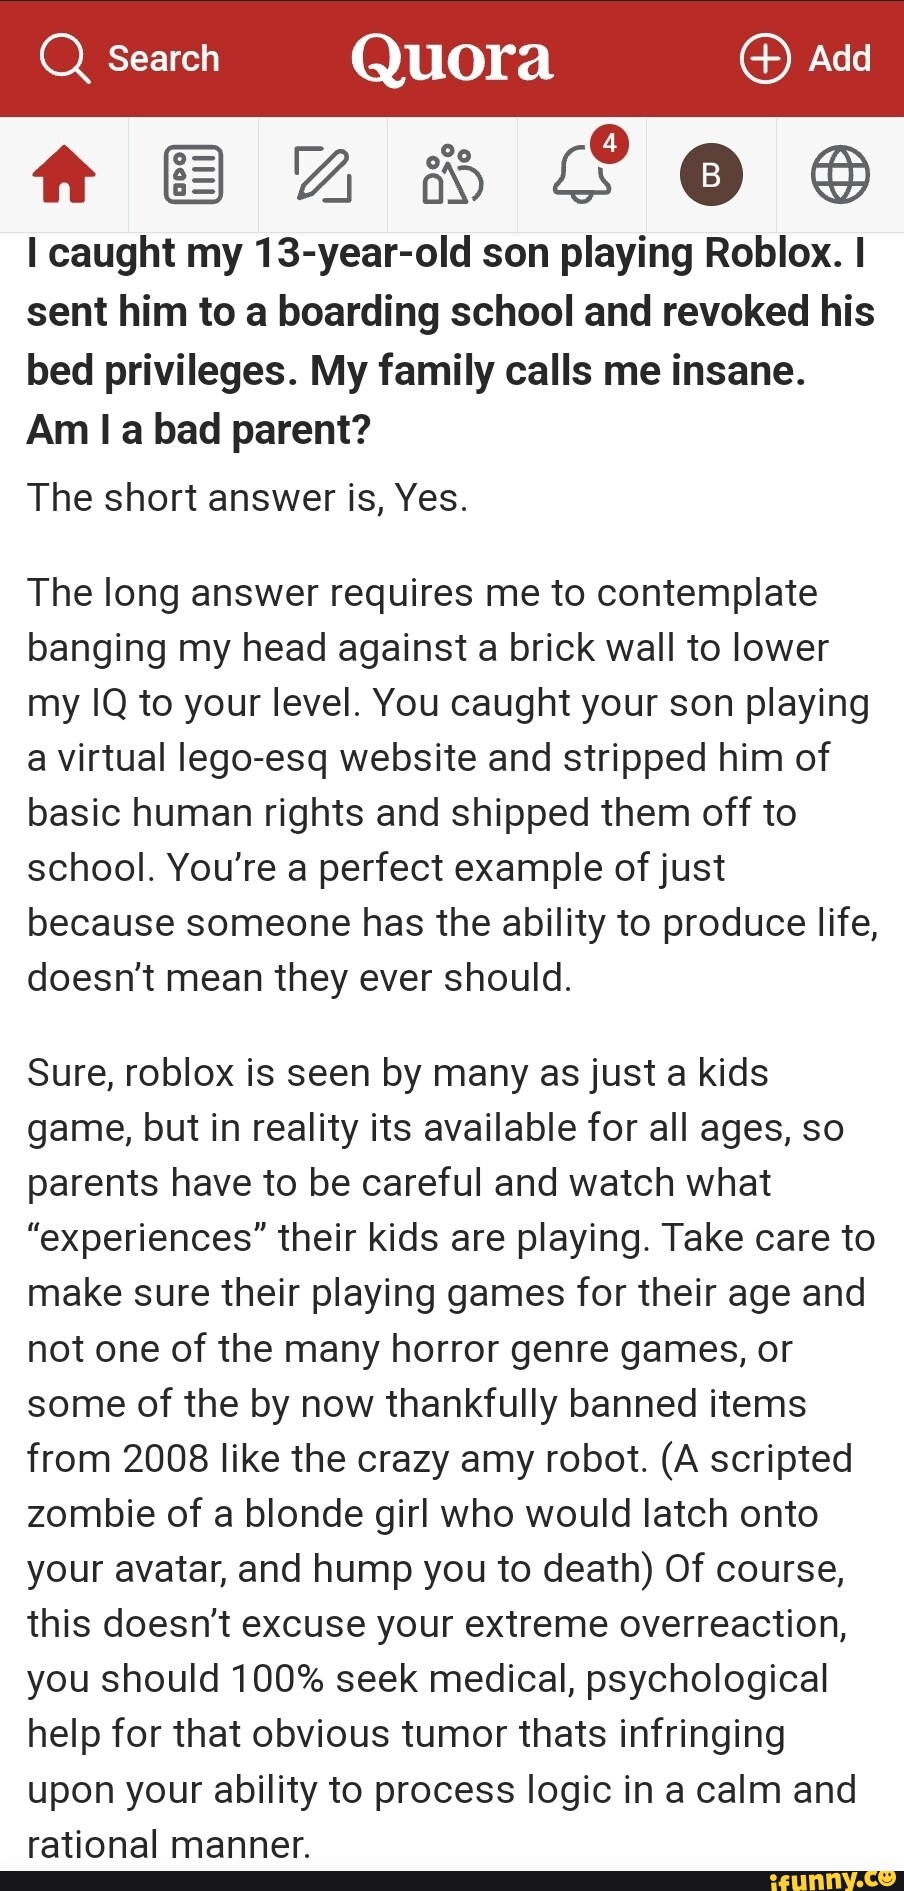 Does Roblox have good quality games? - Quora